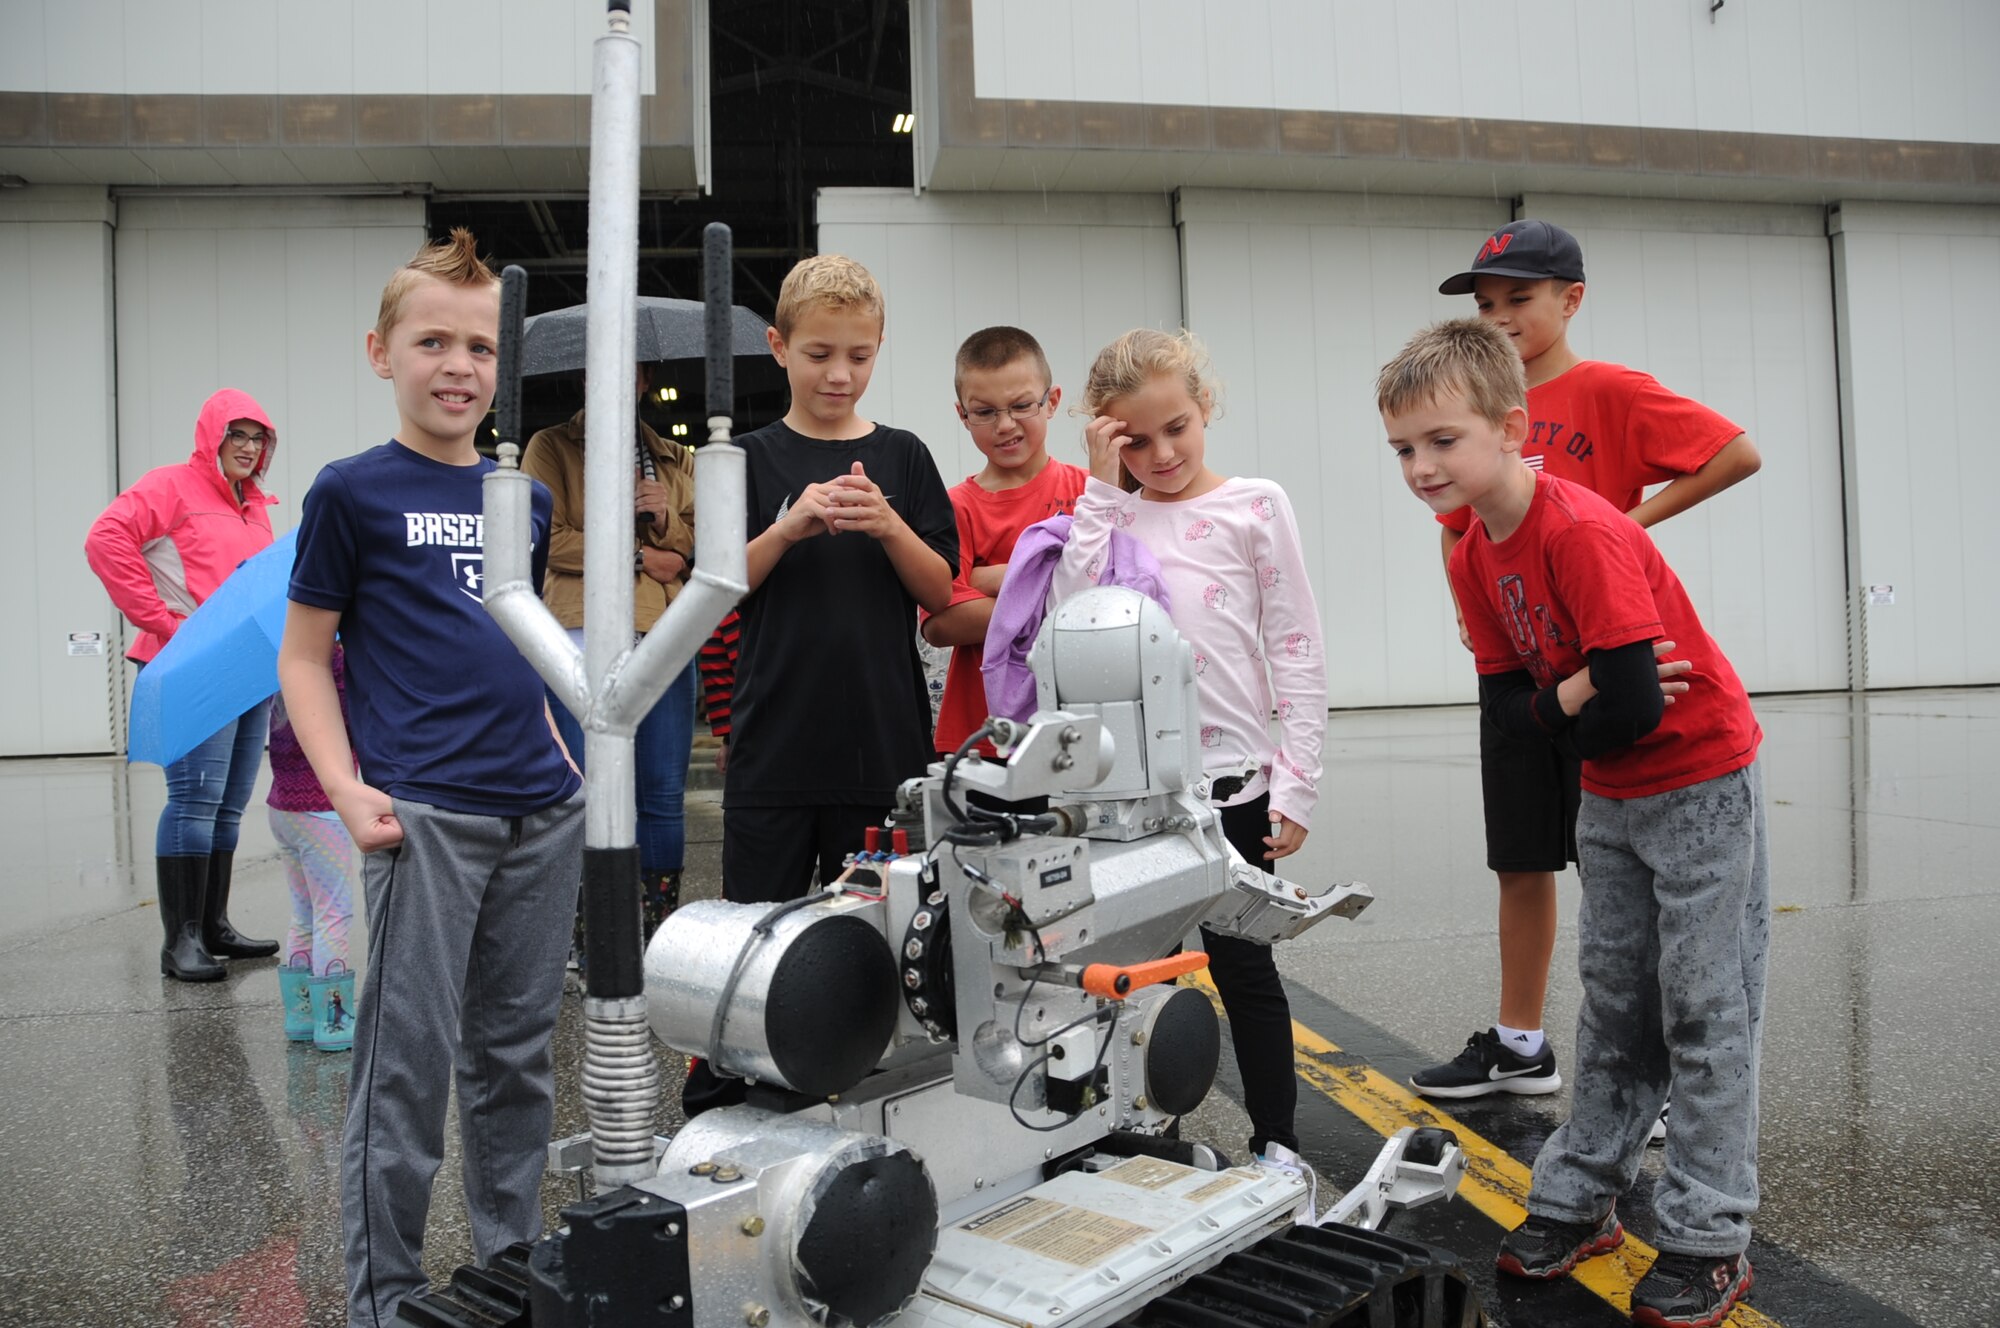 Children interact with an explosive ordnance disposal robot during Family Appreciation Day at Grissom Air Reserve Base, Ind., Sept. 8, 2018. Airmen and their families were invited to have lunch and participate in various activities on base. (U.S. Air Force photo / Senior Airman Harrison Withrow)